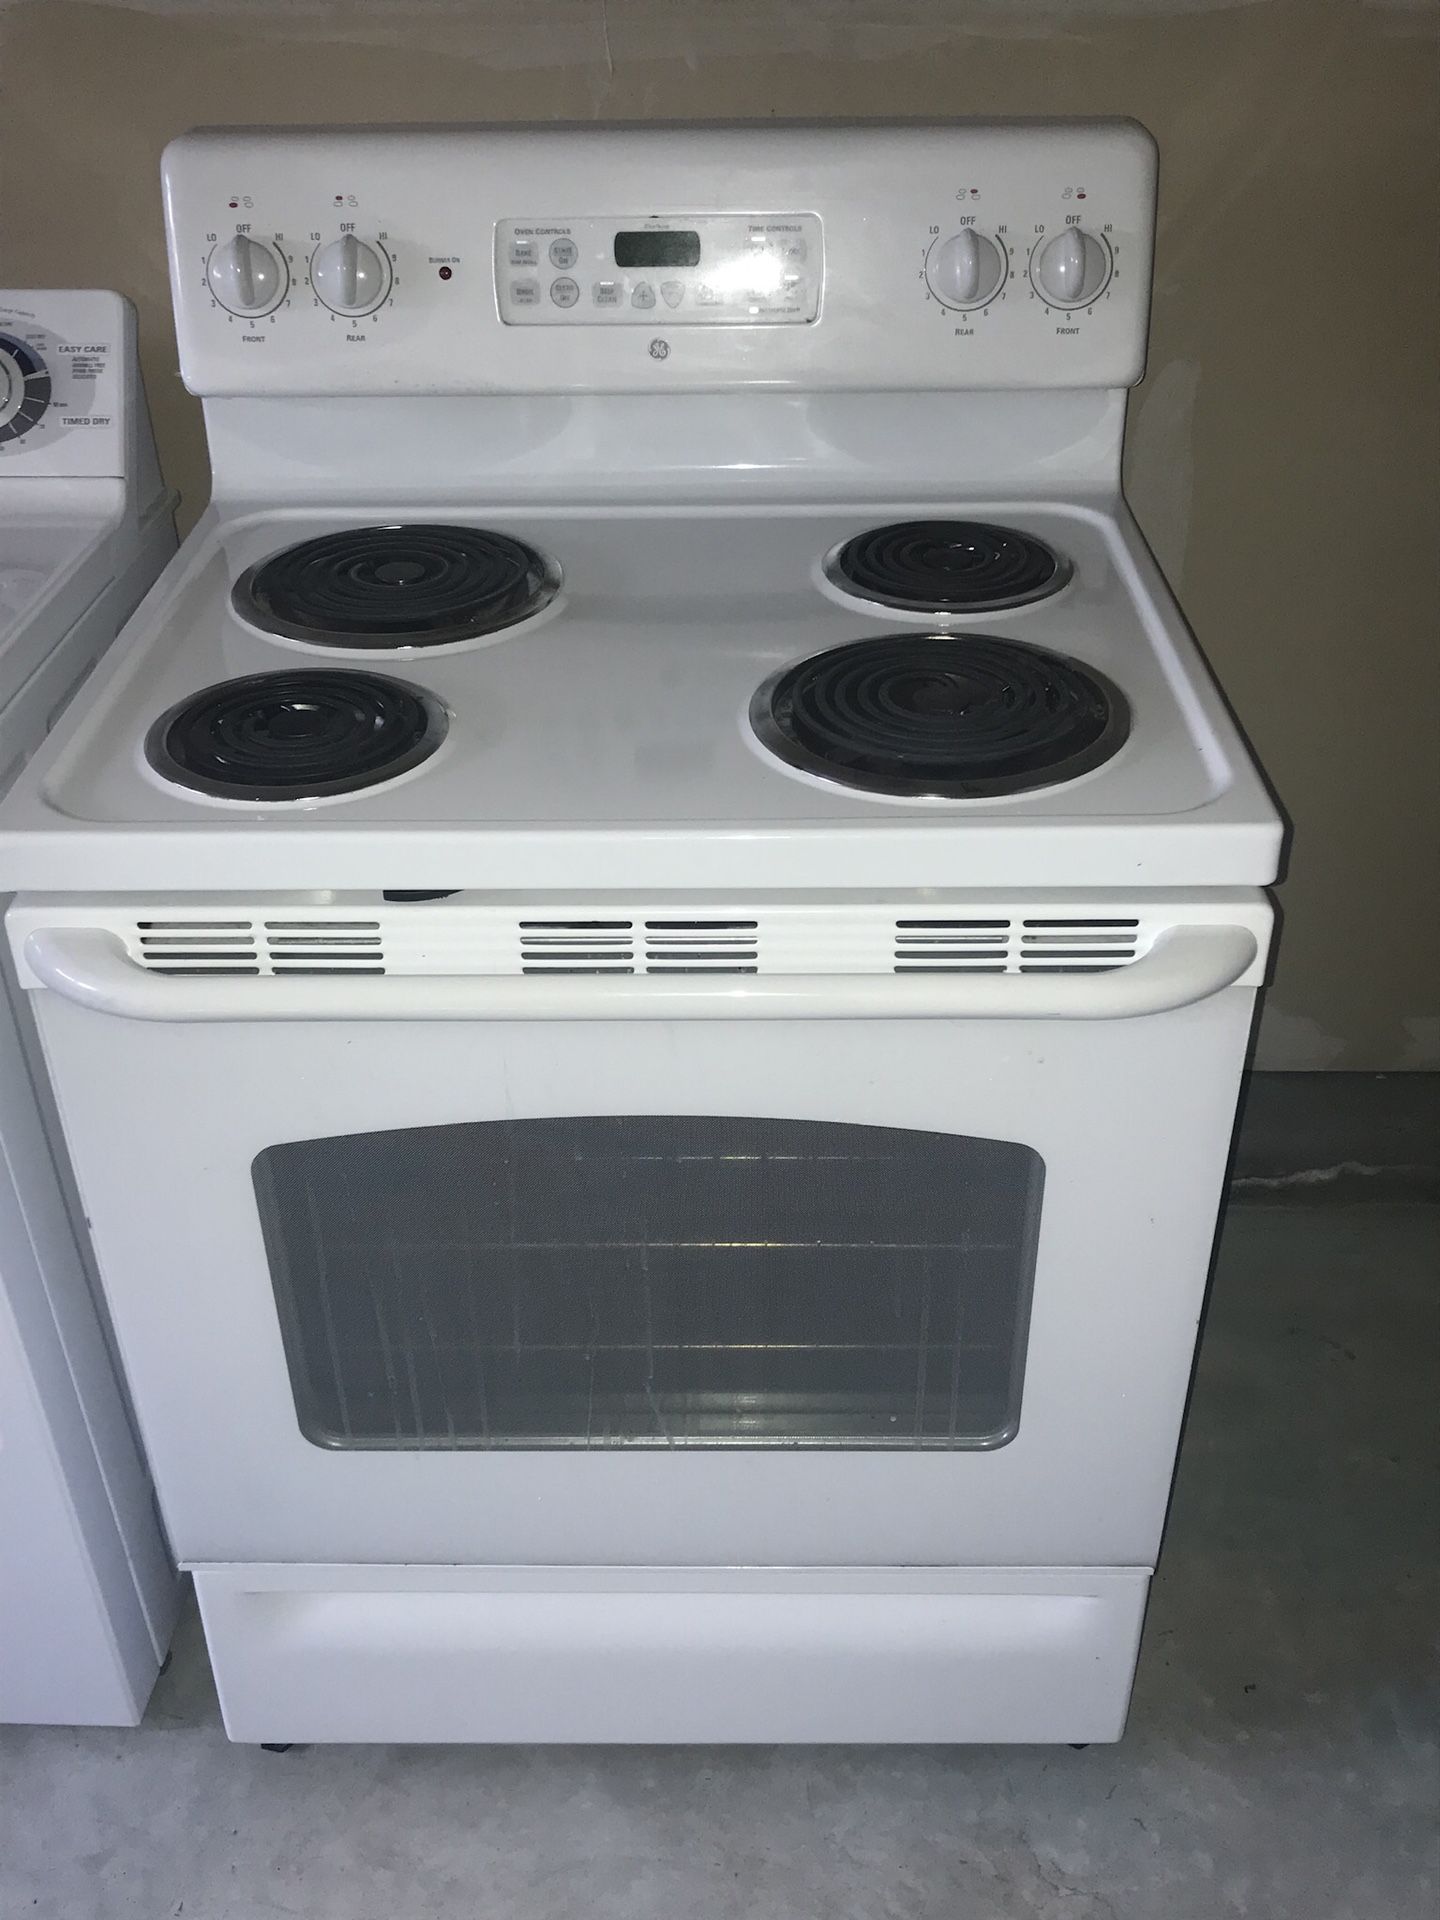 Gently used electric stove